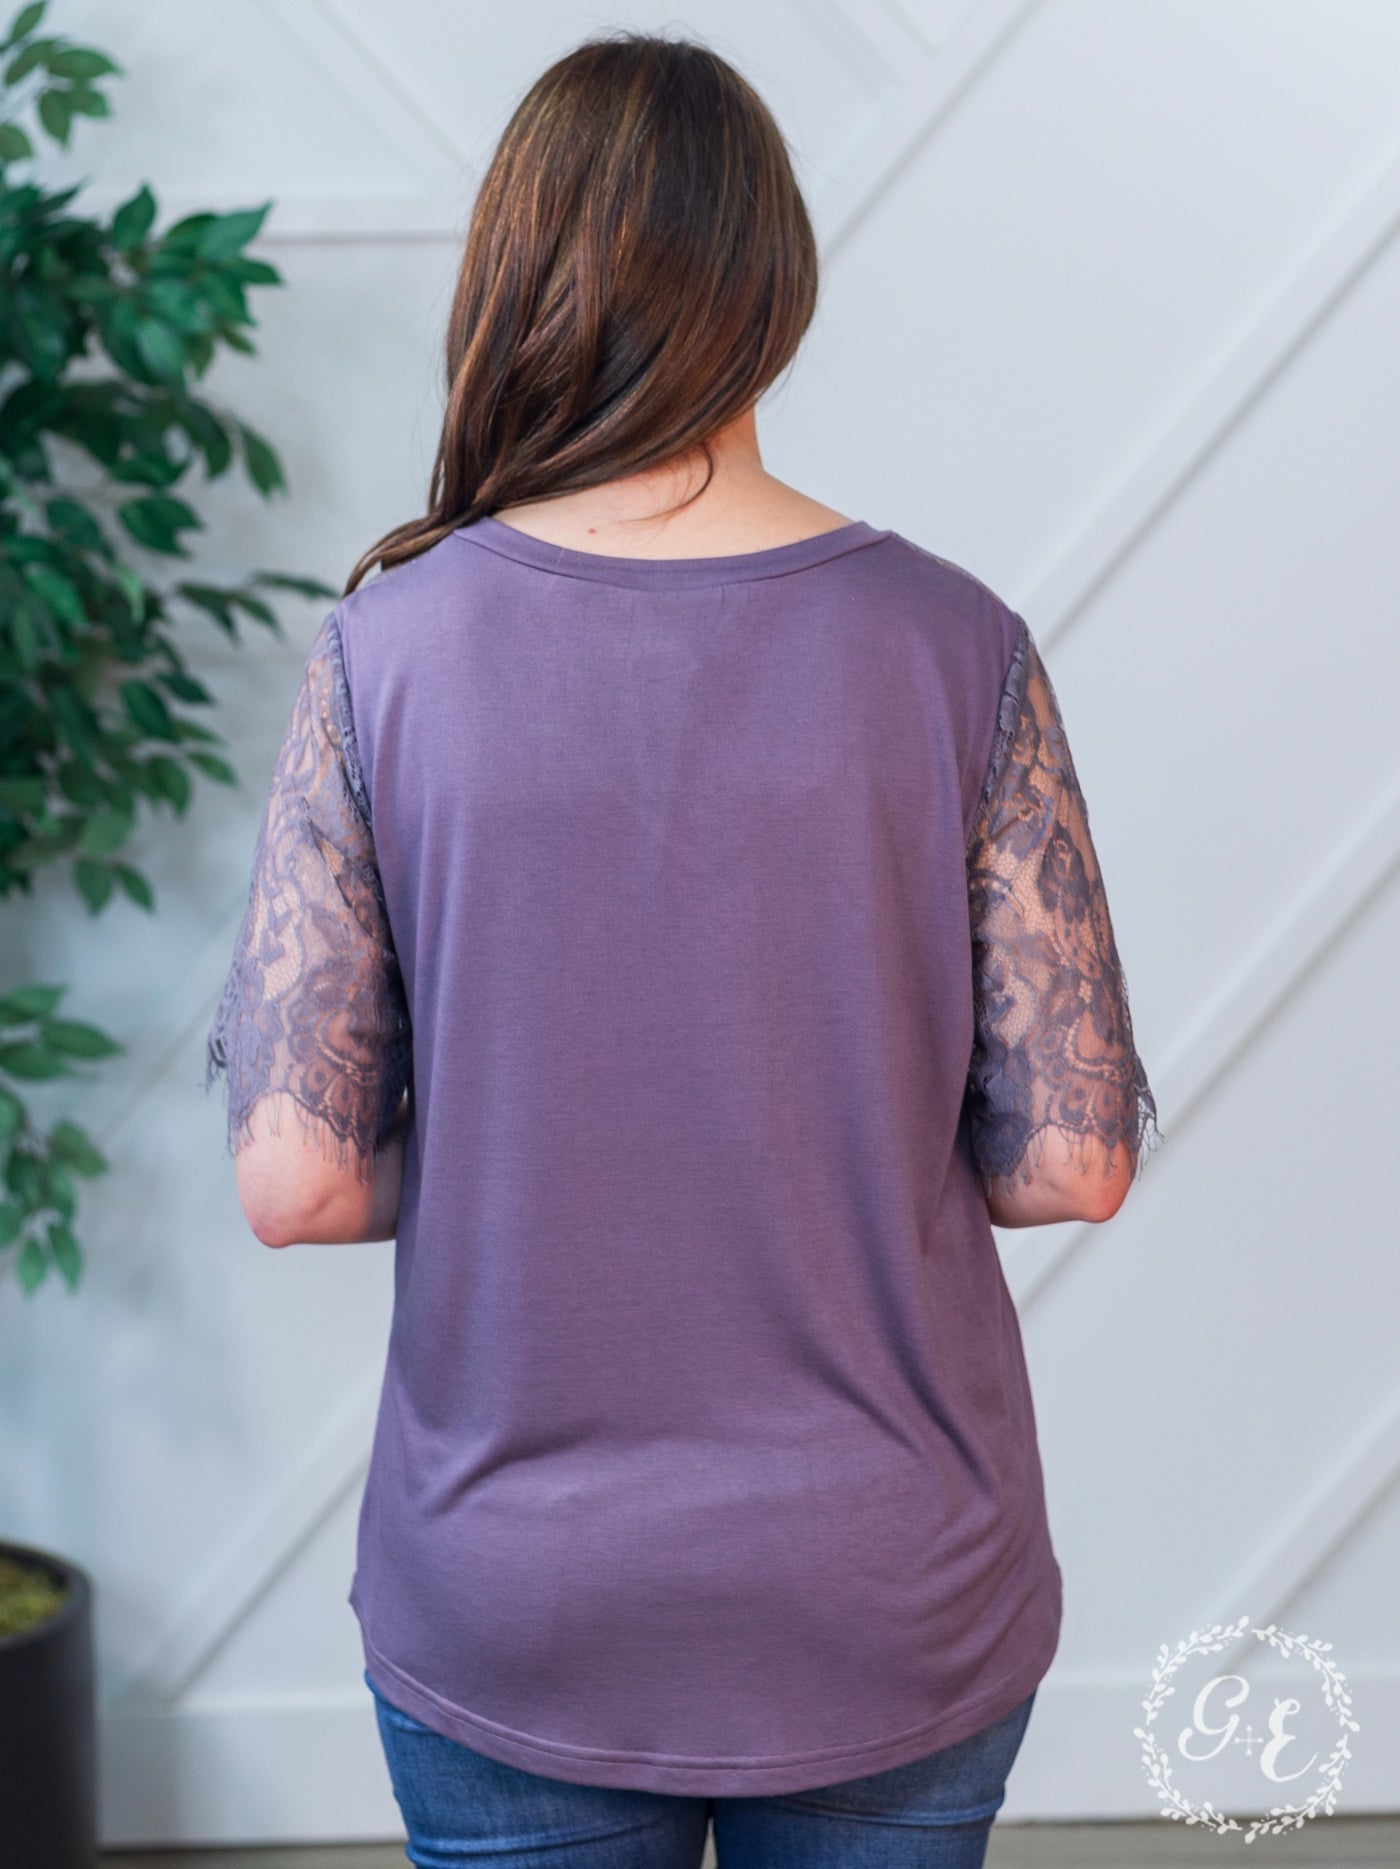 Montana Moon V-Neck Lace Short Sleeve Top in Charcoal Purple